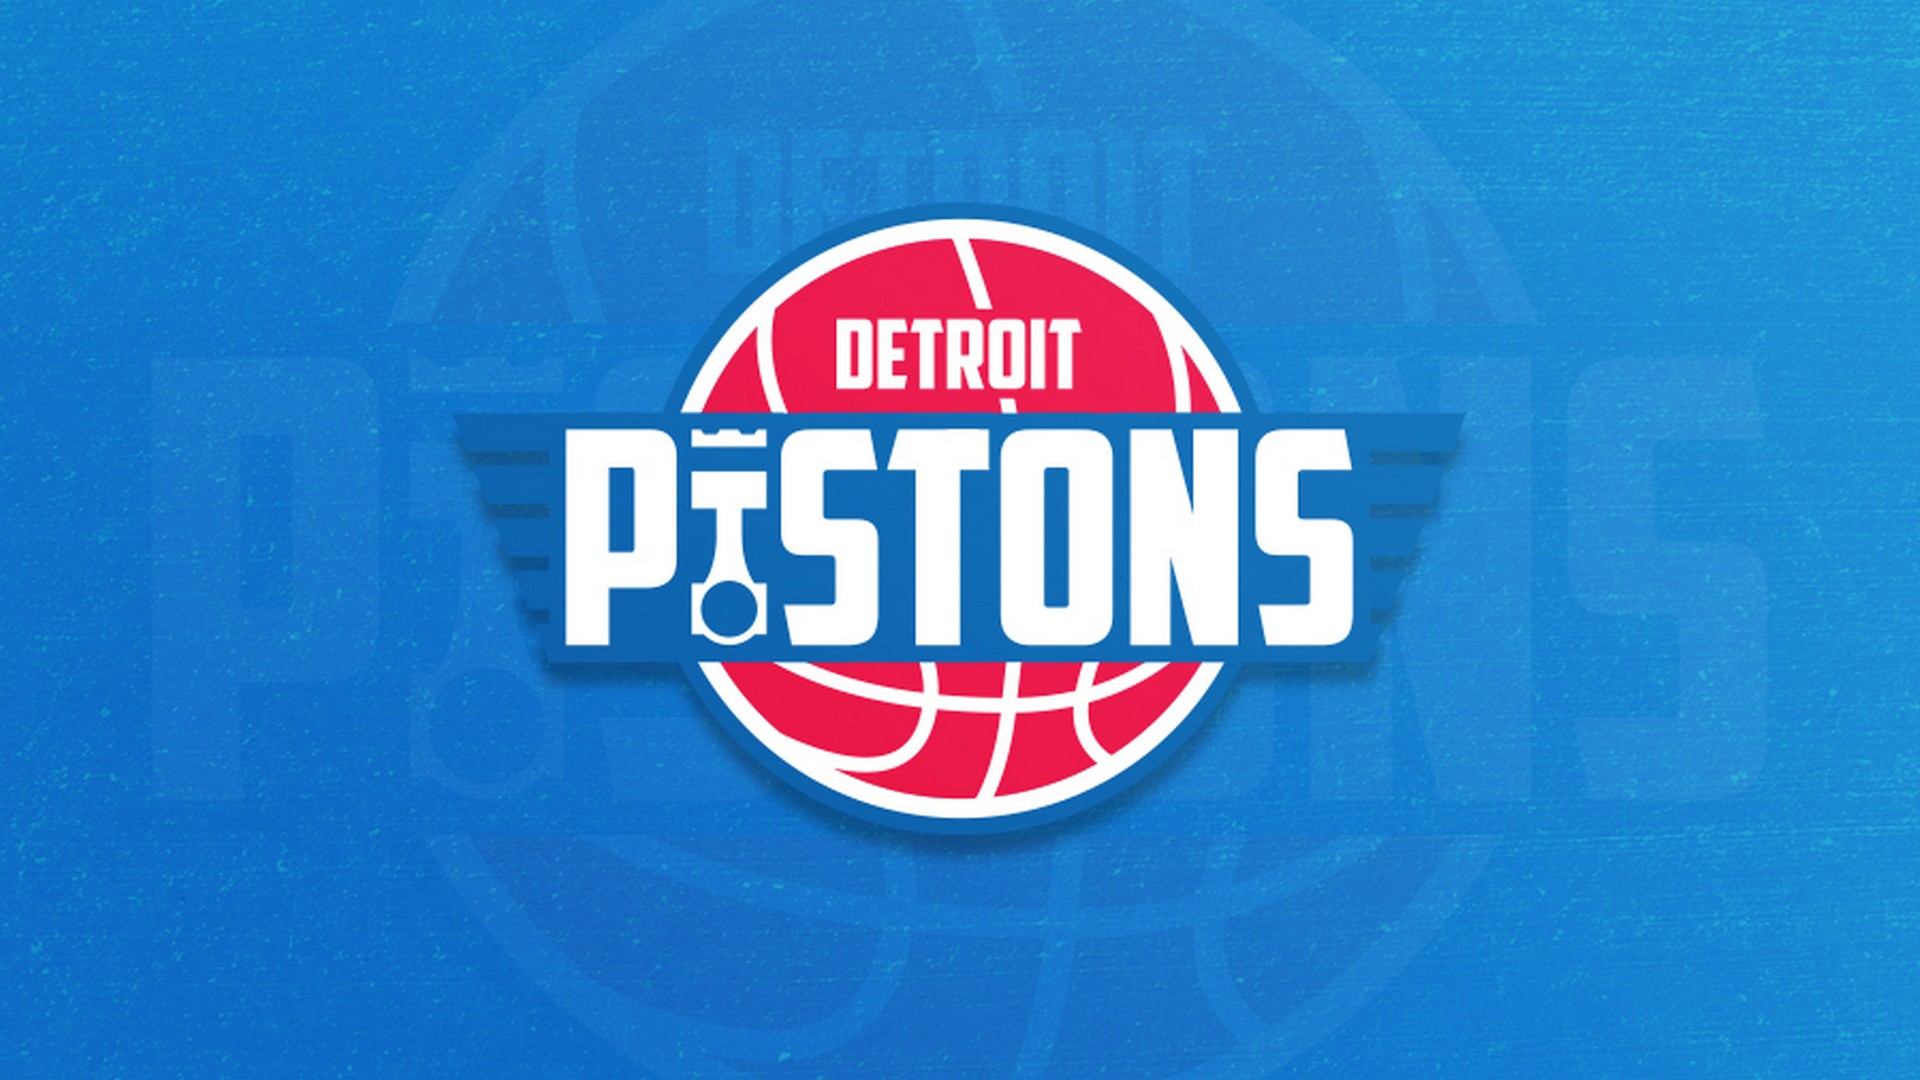 Wallpapers HD Detroit Pistons Logo With high-resolution 1920X1080 pixel. You can use this wallpaper for your Desktop Computer Backgrounds, Windows or Mac Screensavers, iPhone Lock screen, Tablet or Android and another Mobile Phone device